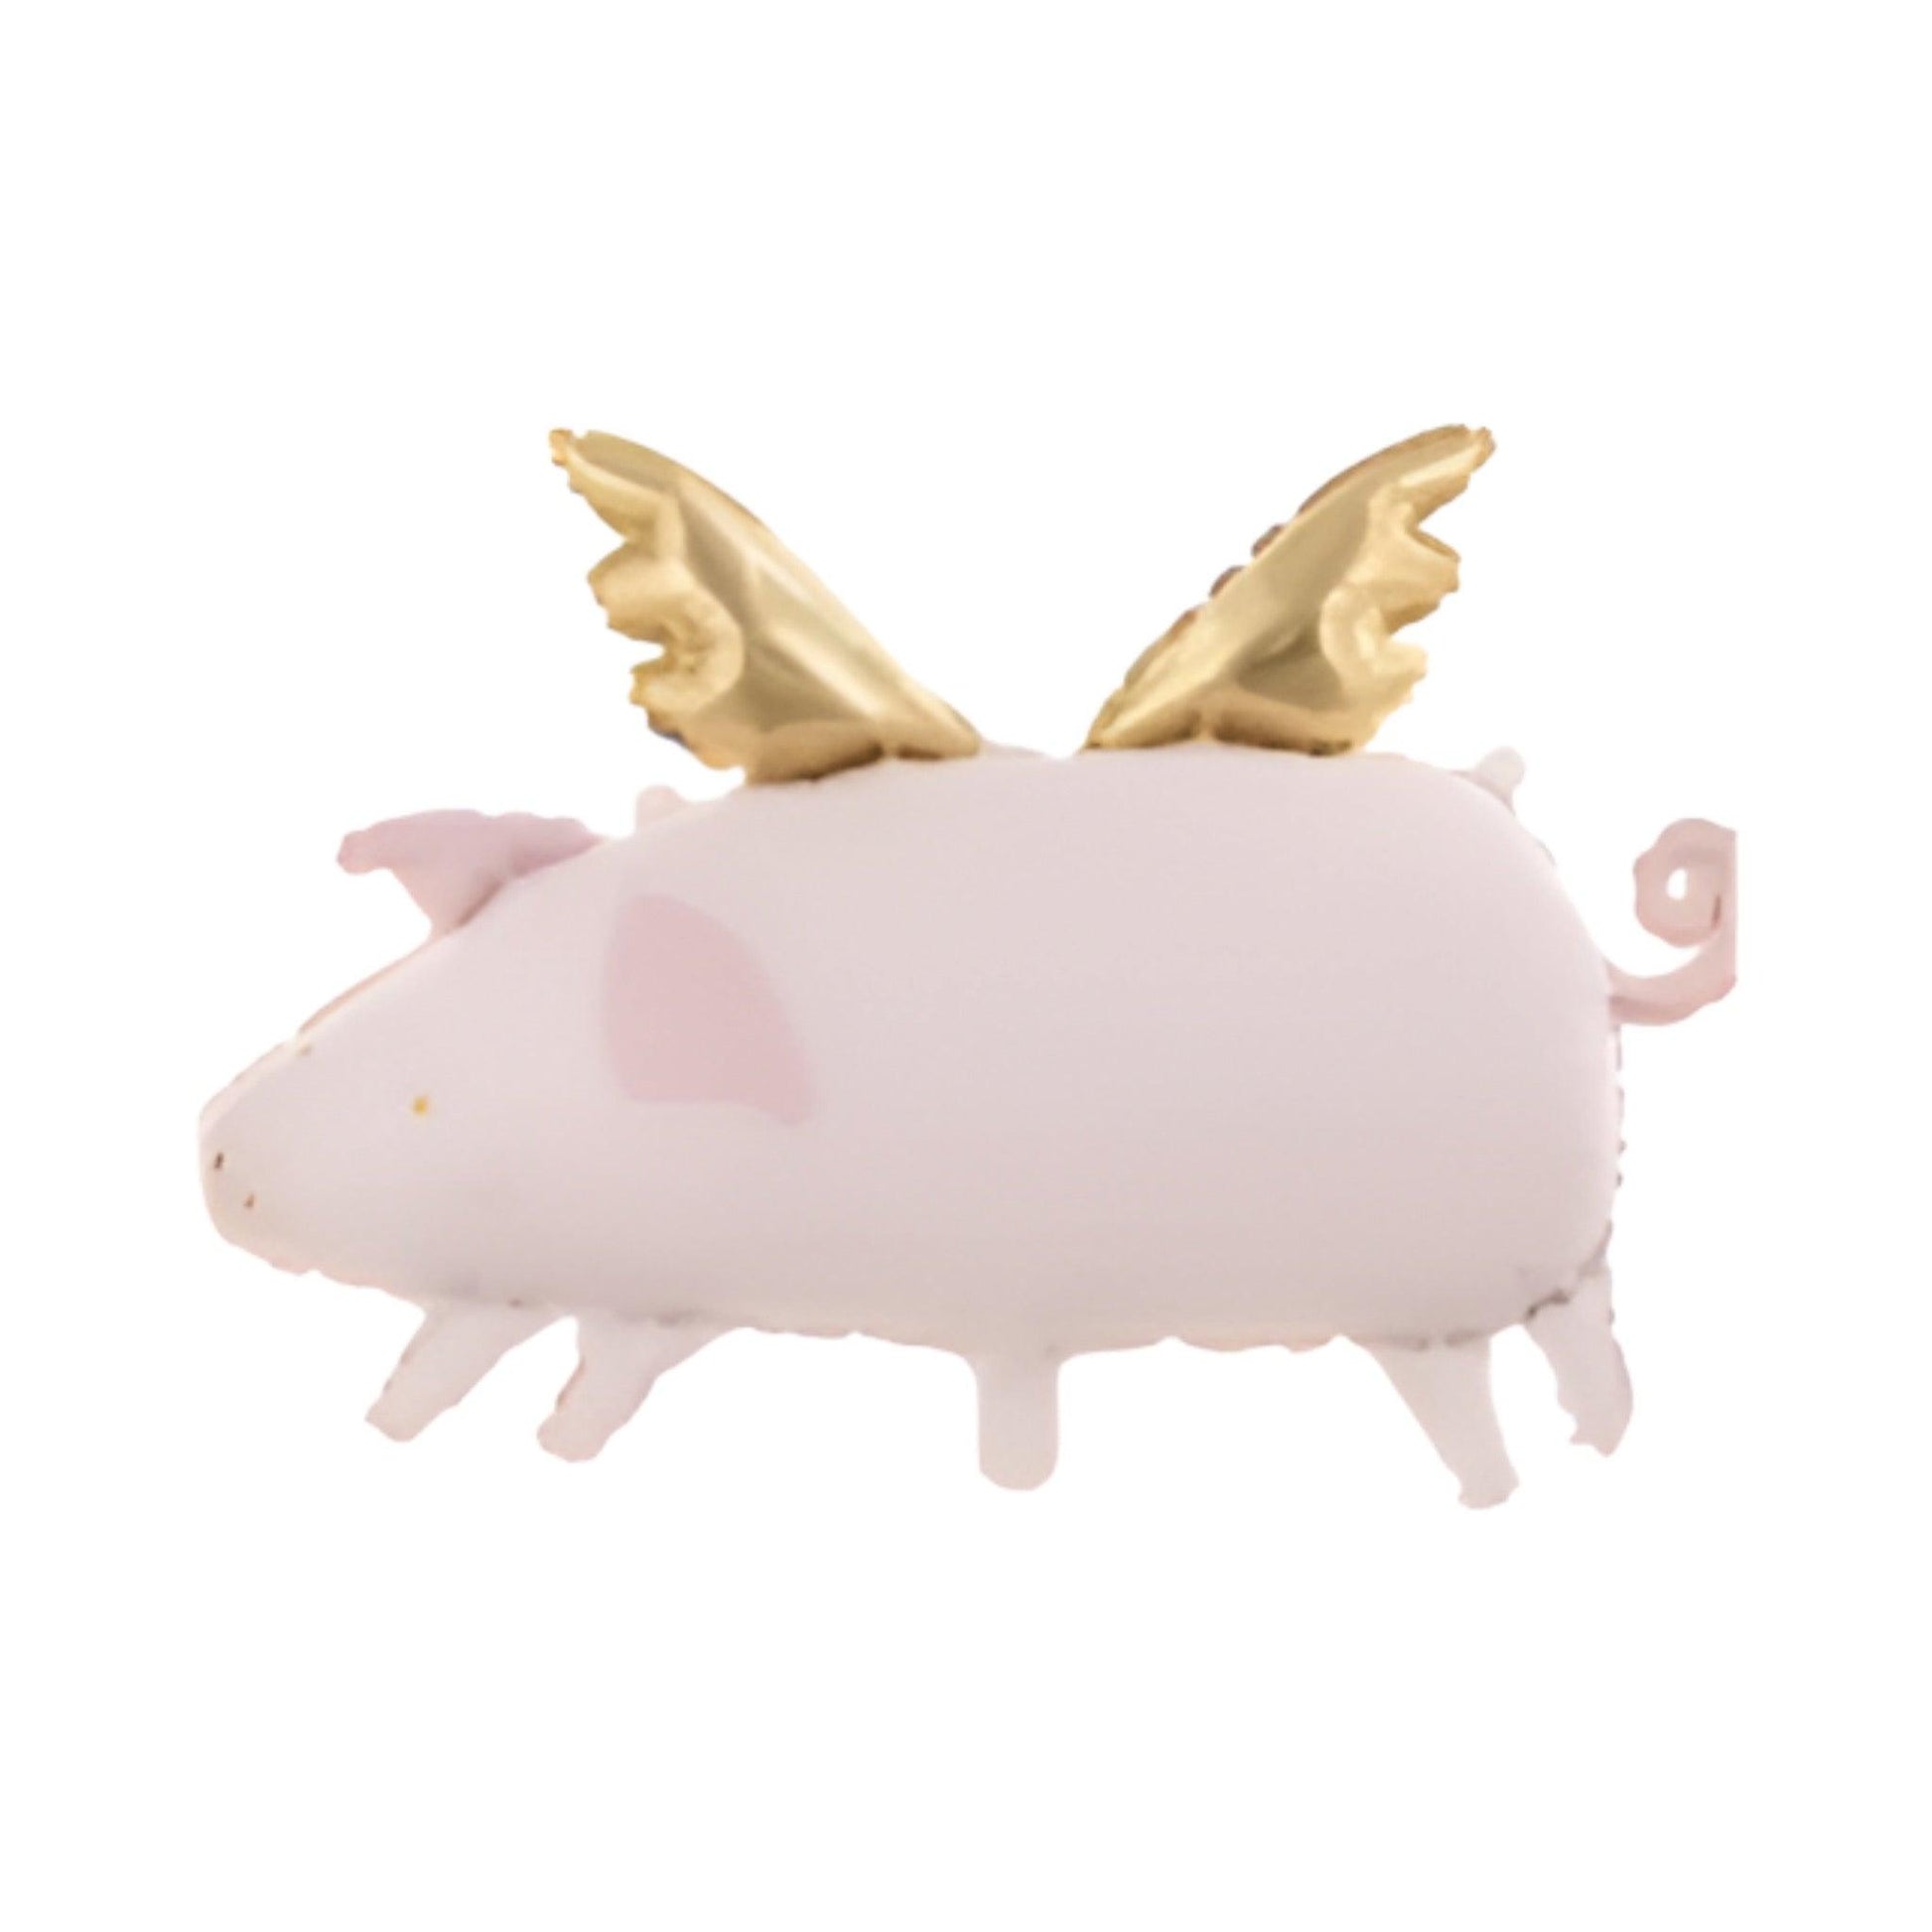 Pink Jumbo Flying Pig Balloon with gold wings. Helium quality